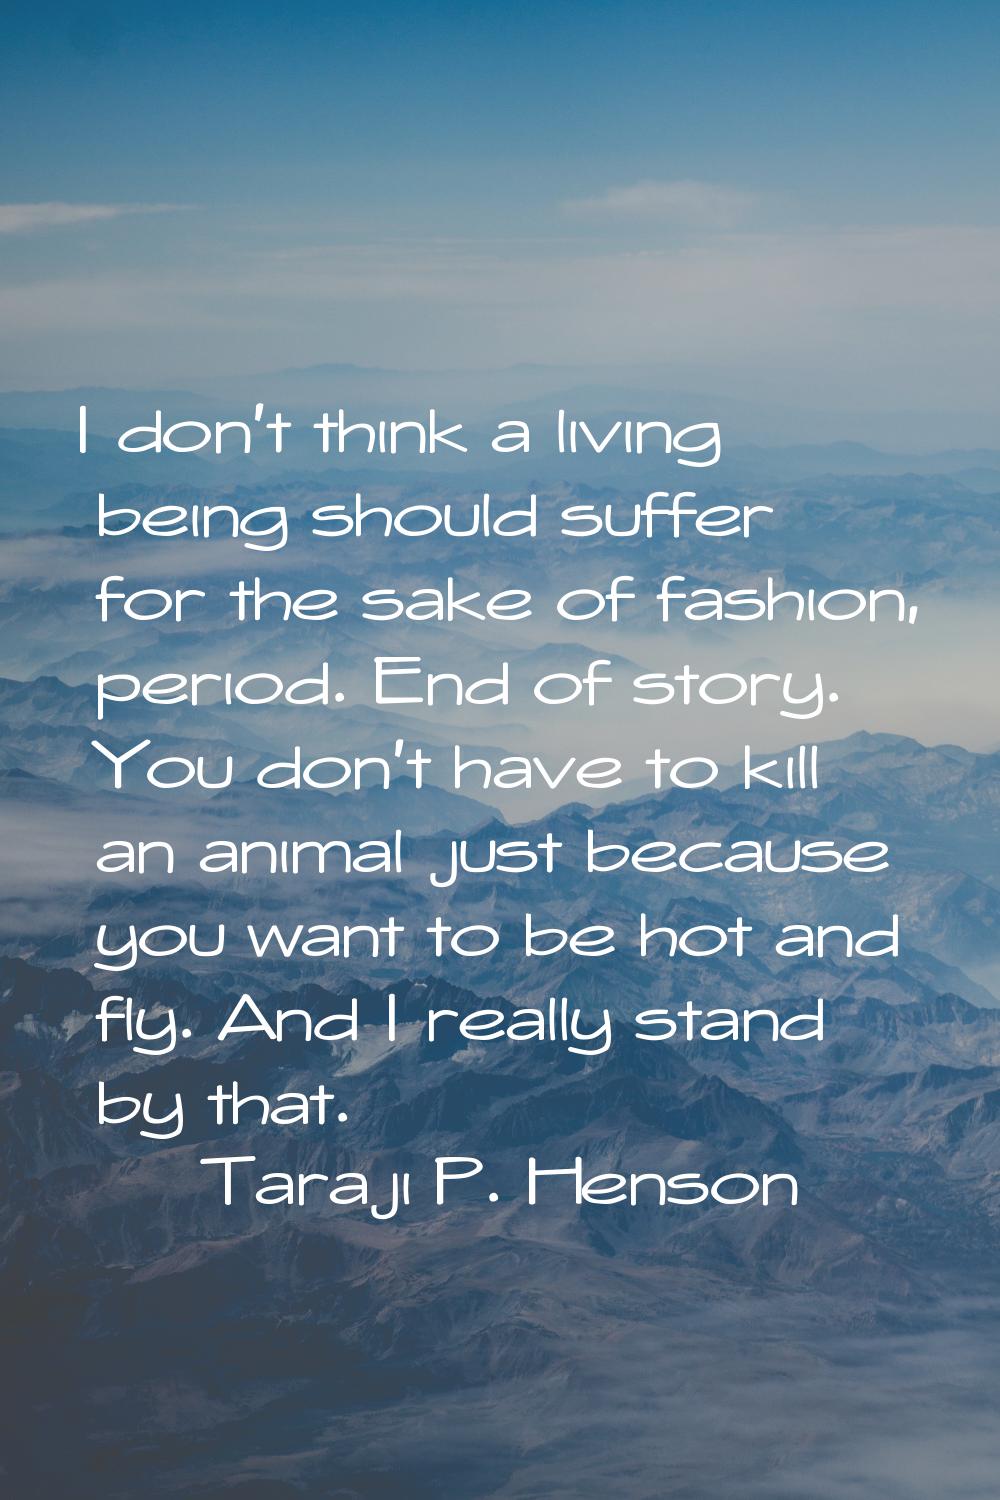 I don't think a living being should suffer for the sake of fashion, period. End of story. You don't